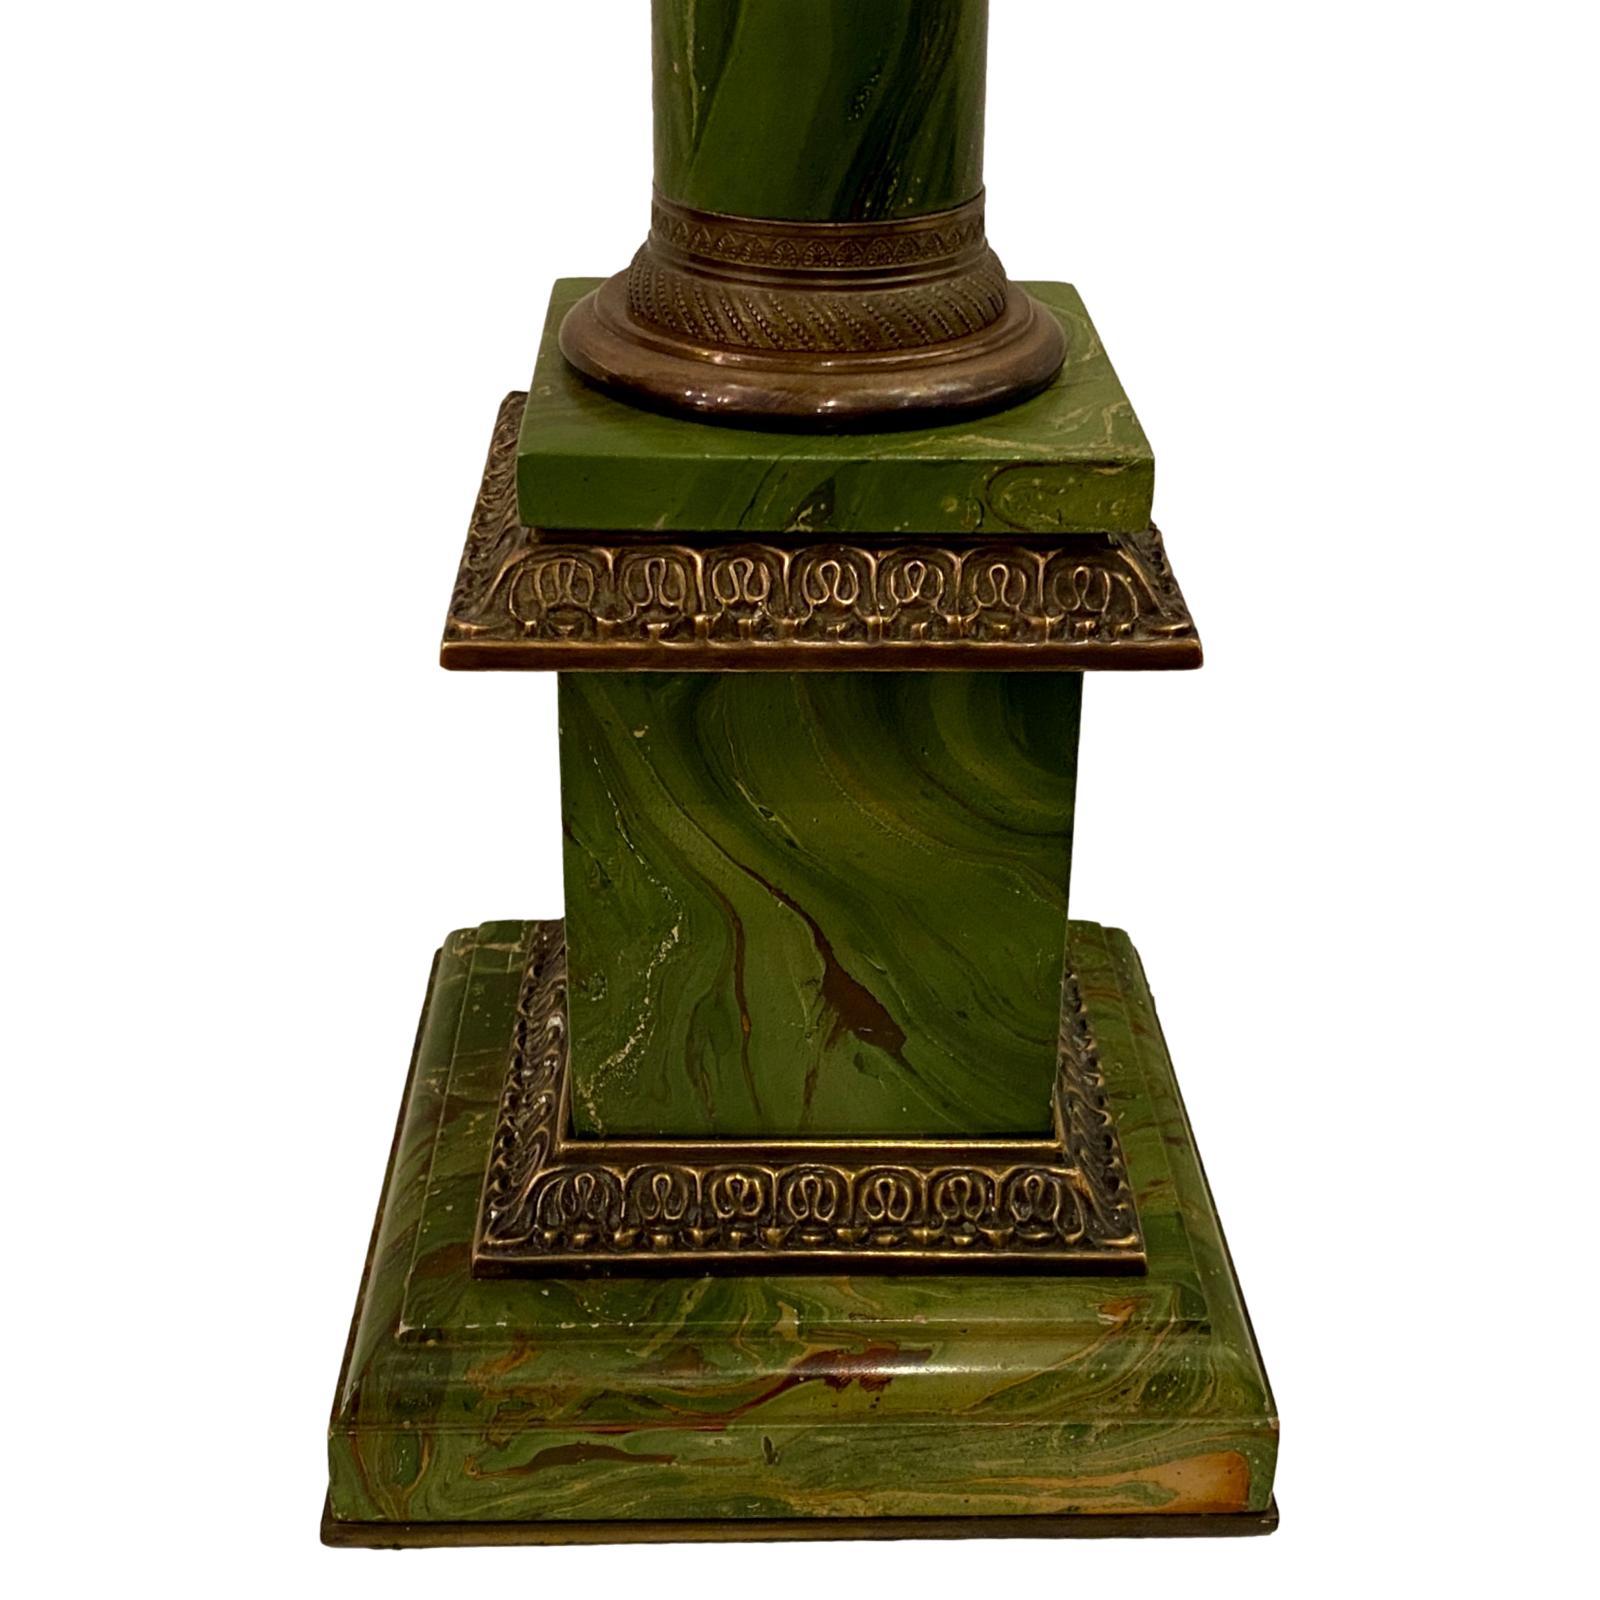 A single circa 1920's French painted tole table lamp with faux marble finish and bronze fittings.

Measurements:
Height of body: 22